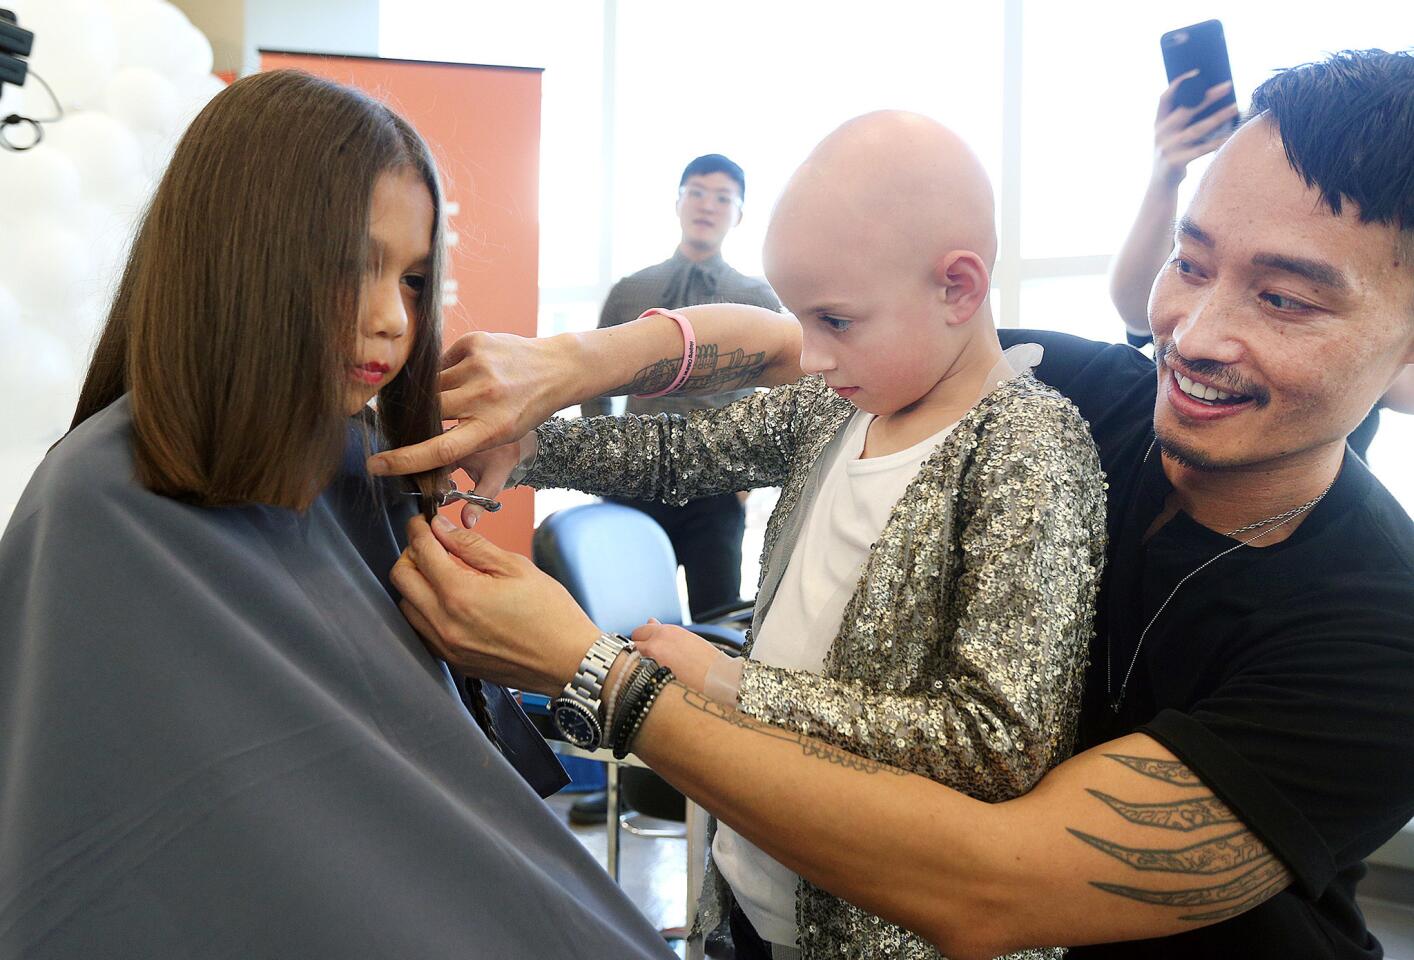 Photo Gallery: Locks of Love event at Dignity Health - Glendale Memorial Hospital